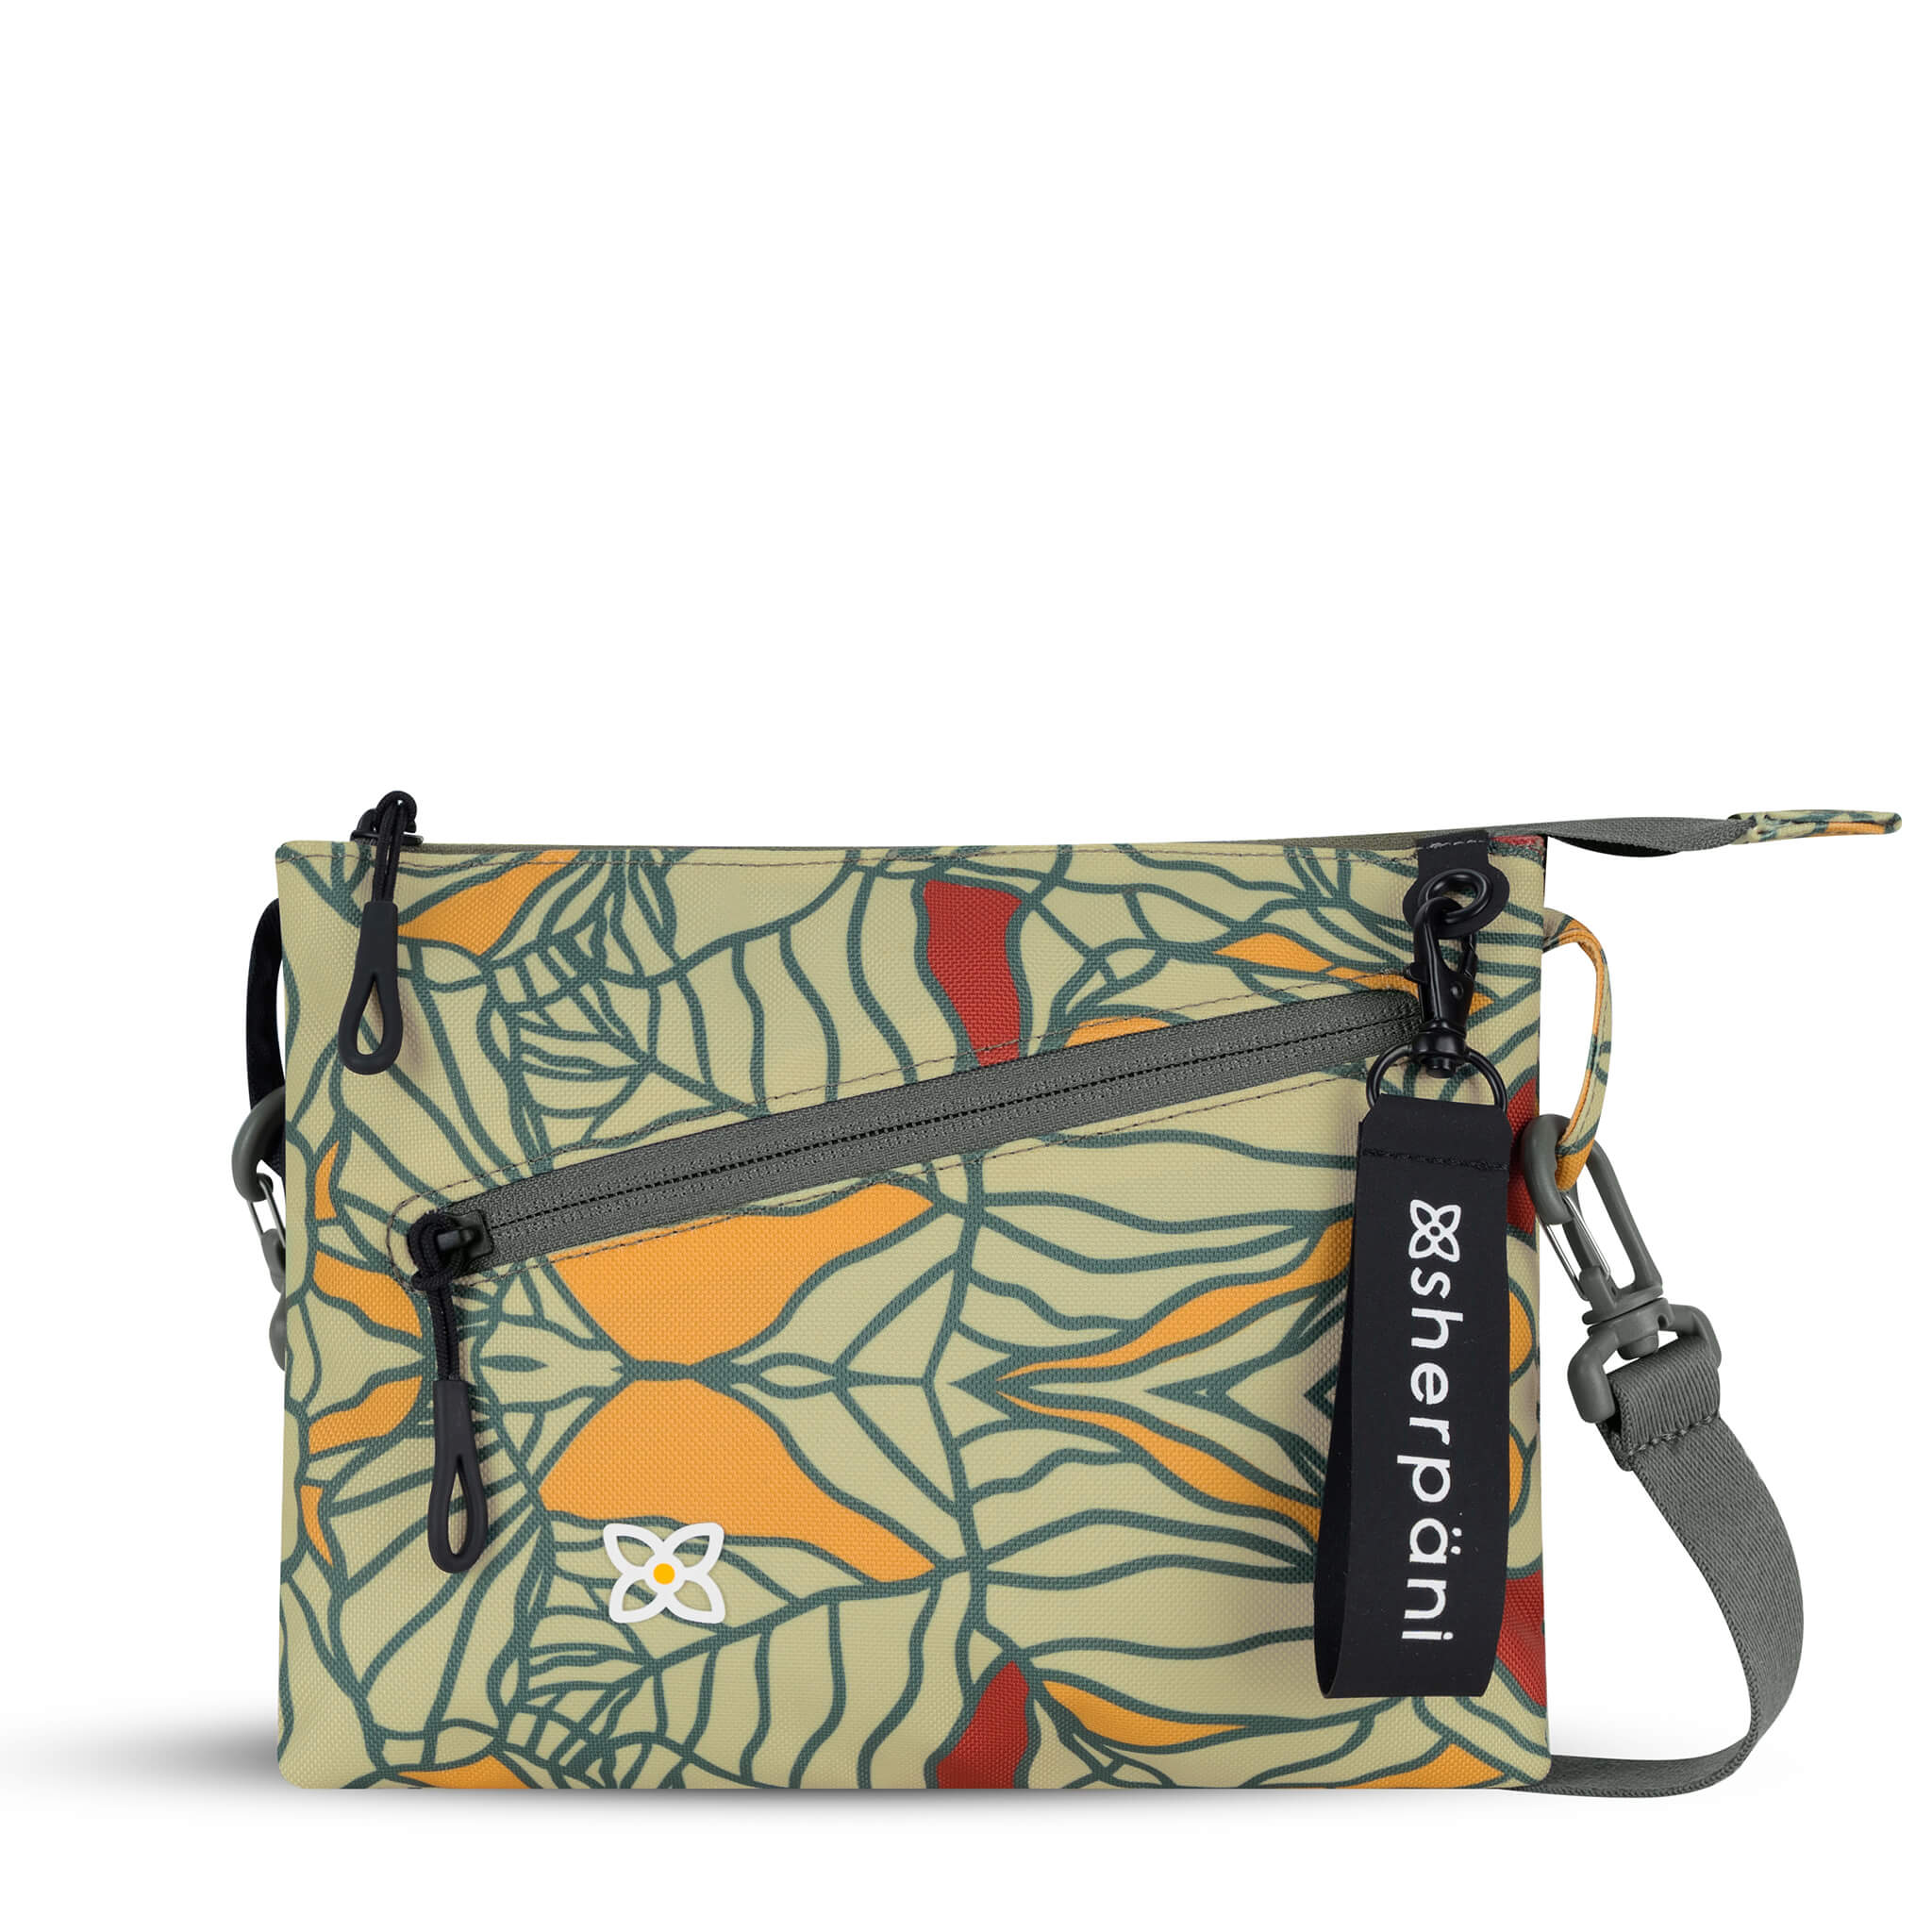 Flat front view of Sherpani small crossbody bag, the Zoom in Fiori. Special features of the Zoom include RFID protection, adjustable crossbody strap, removable strap, removable keychain, outside zipper pocket, internal divider, internal zipper pockets and back slip pocket. The Fiori colorway is two-toned in black and a floral pattern with a neutral color palette.